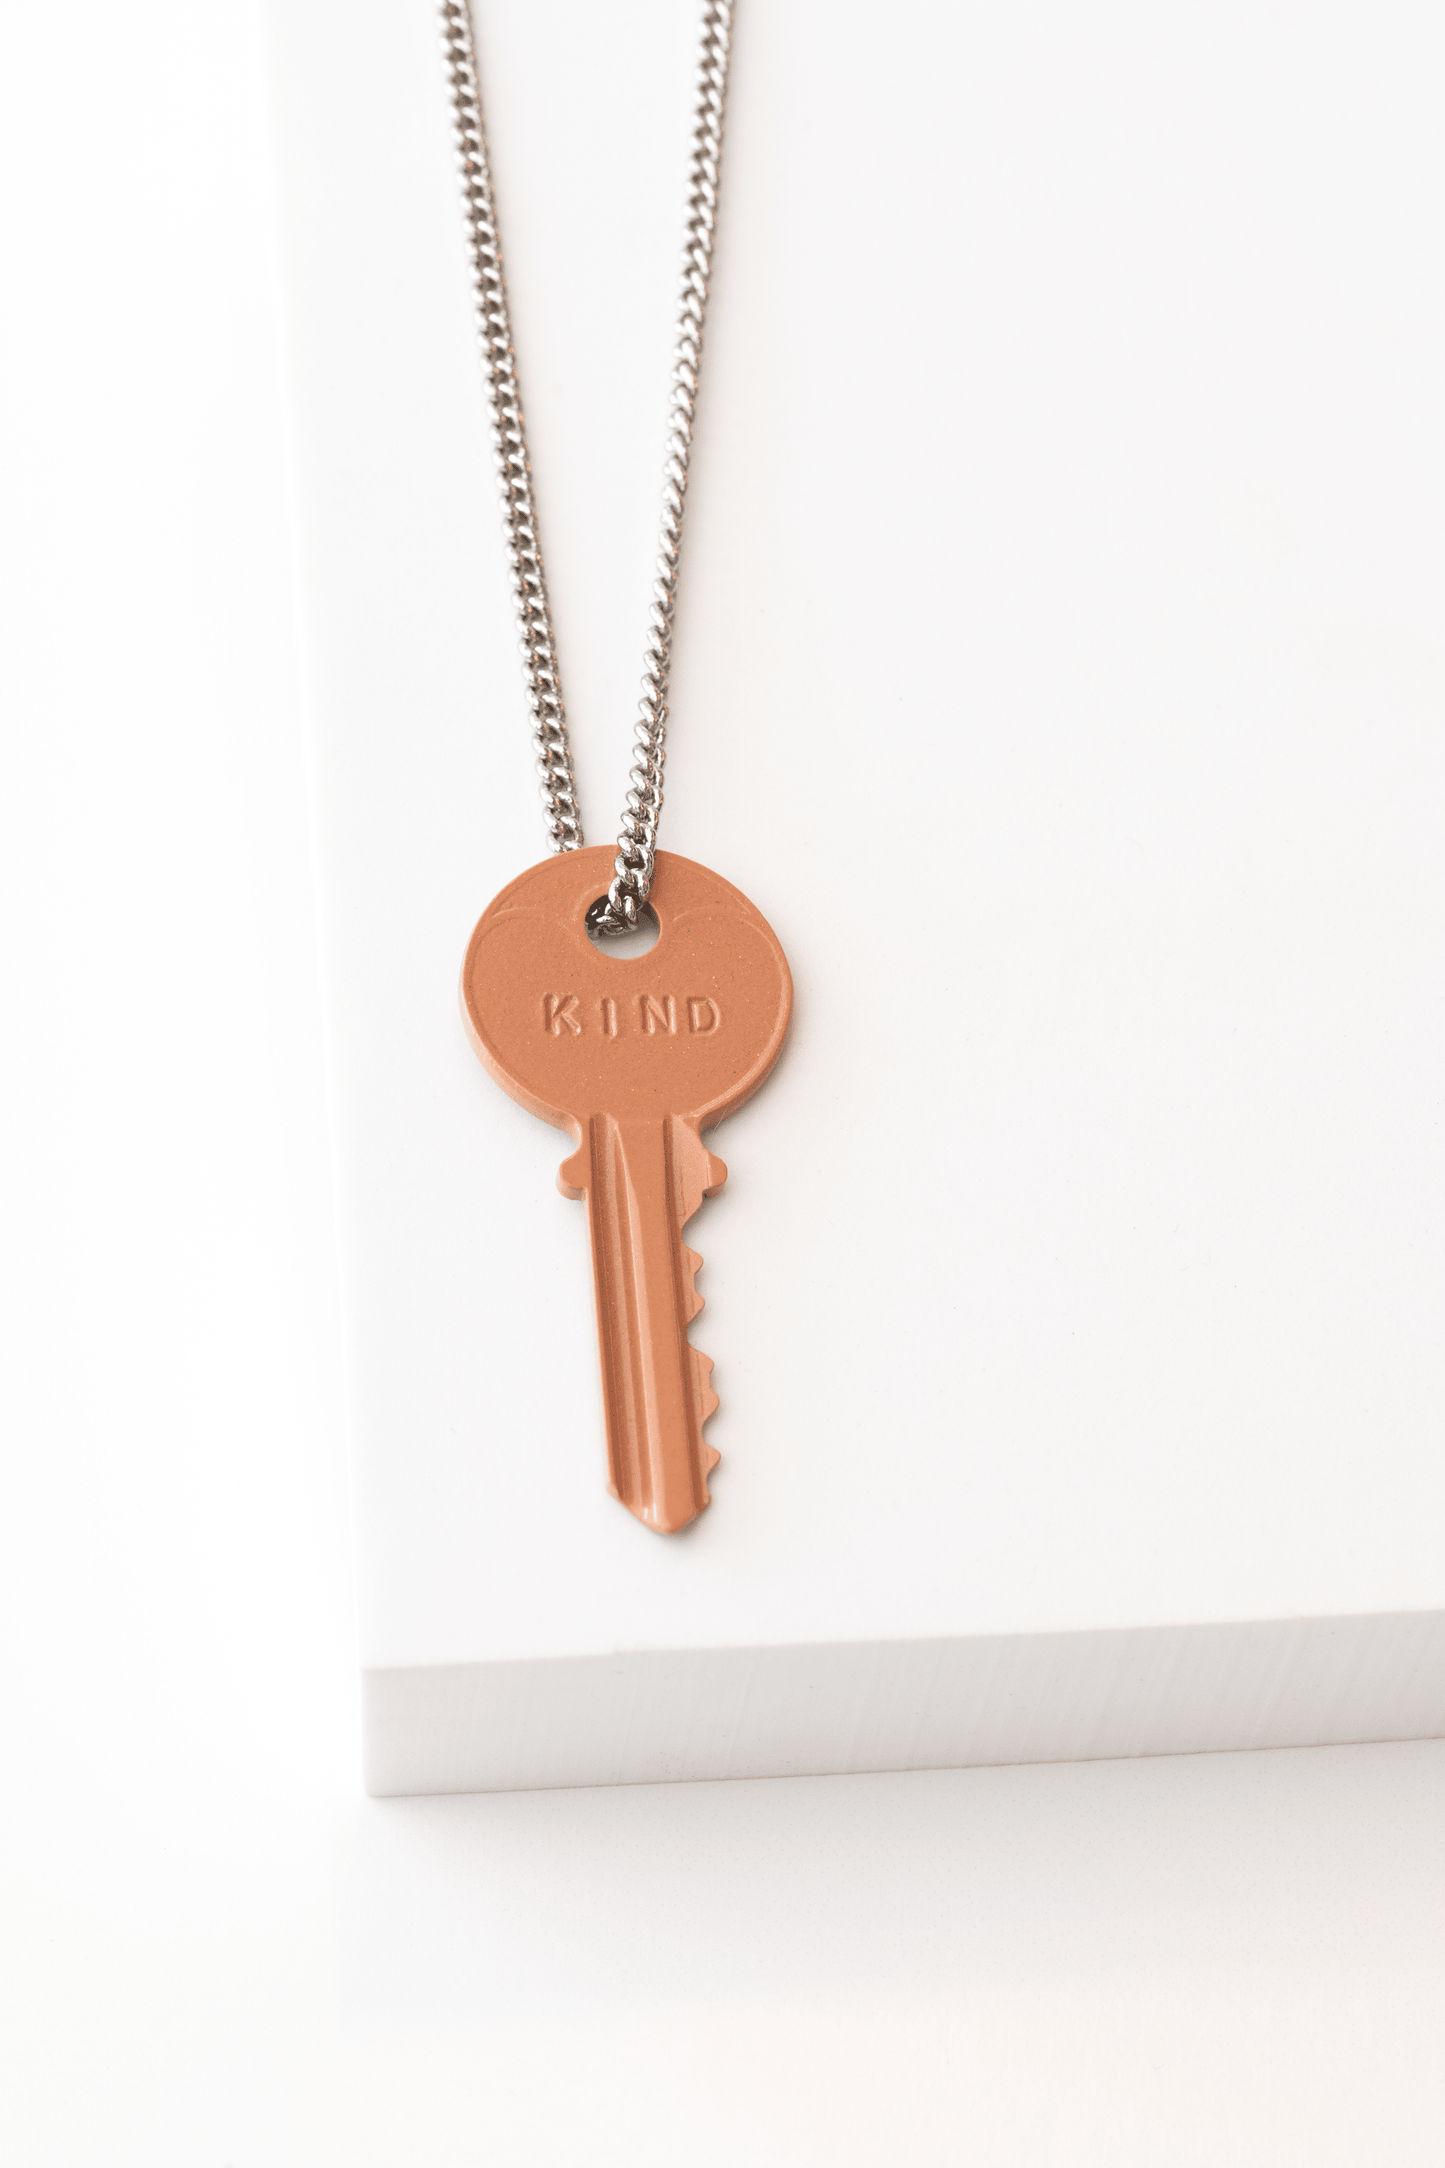 Peach Fuzz Classic Key Necklace Necklaces The Giving Keys Silver 